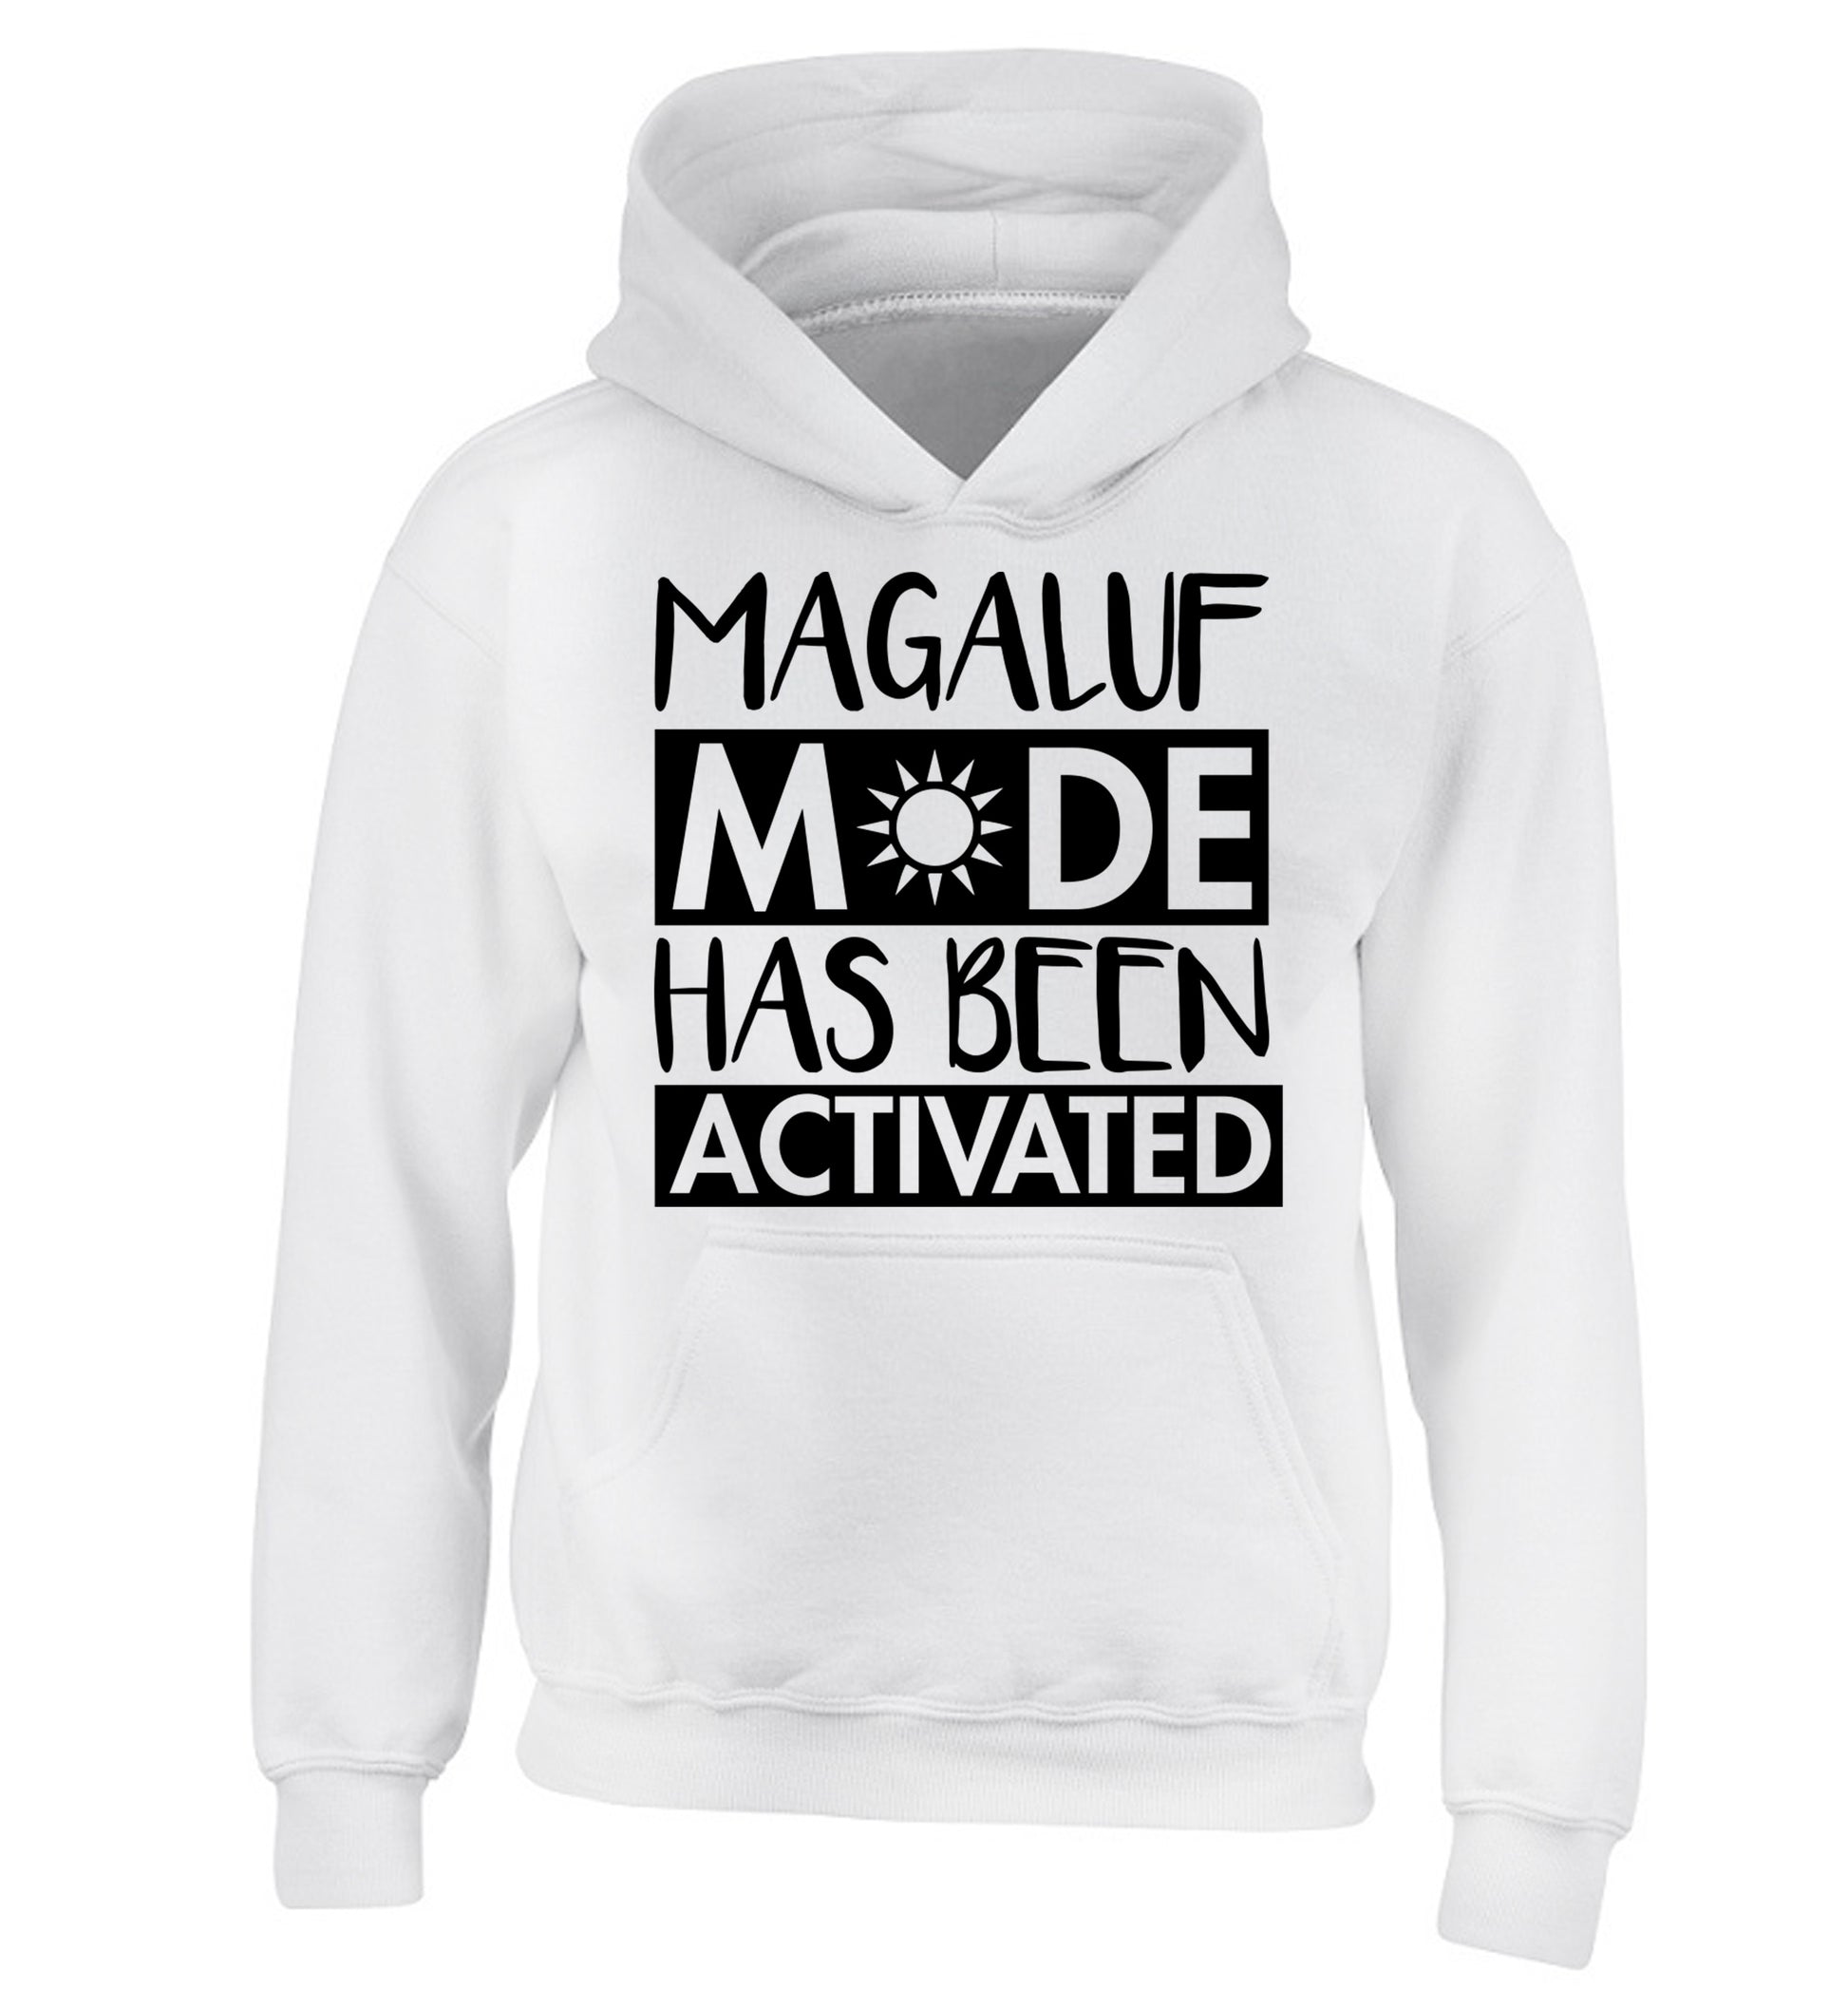 Magaluf mode has been activated children's white hoodie 12-13 Years